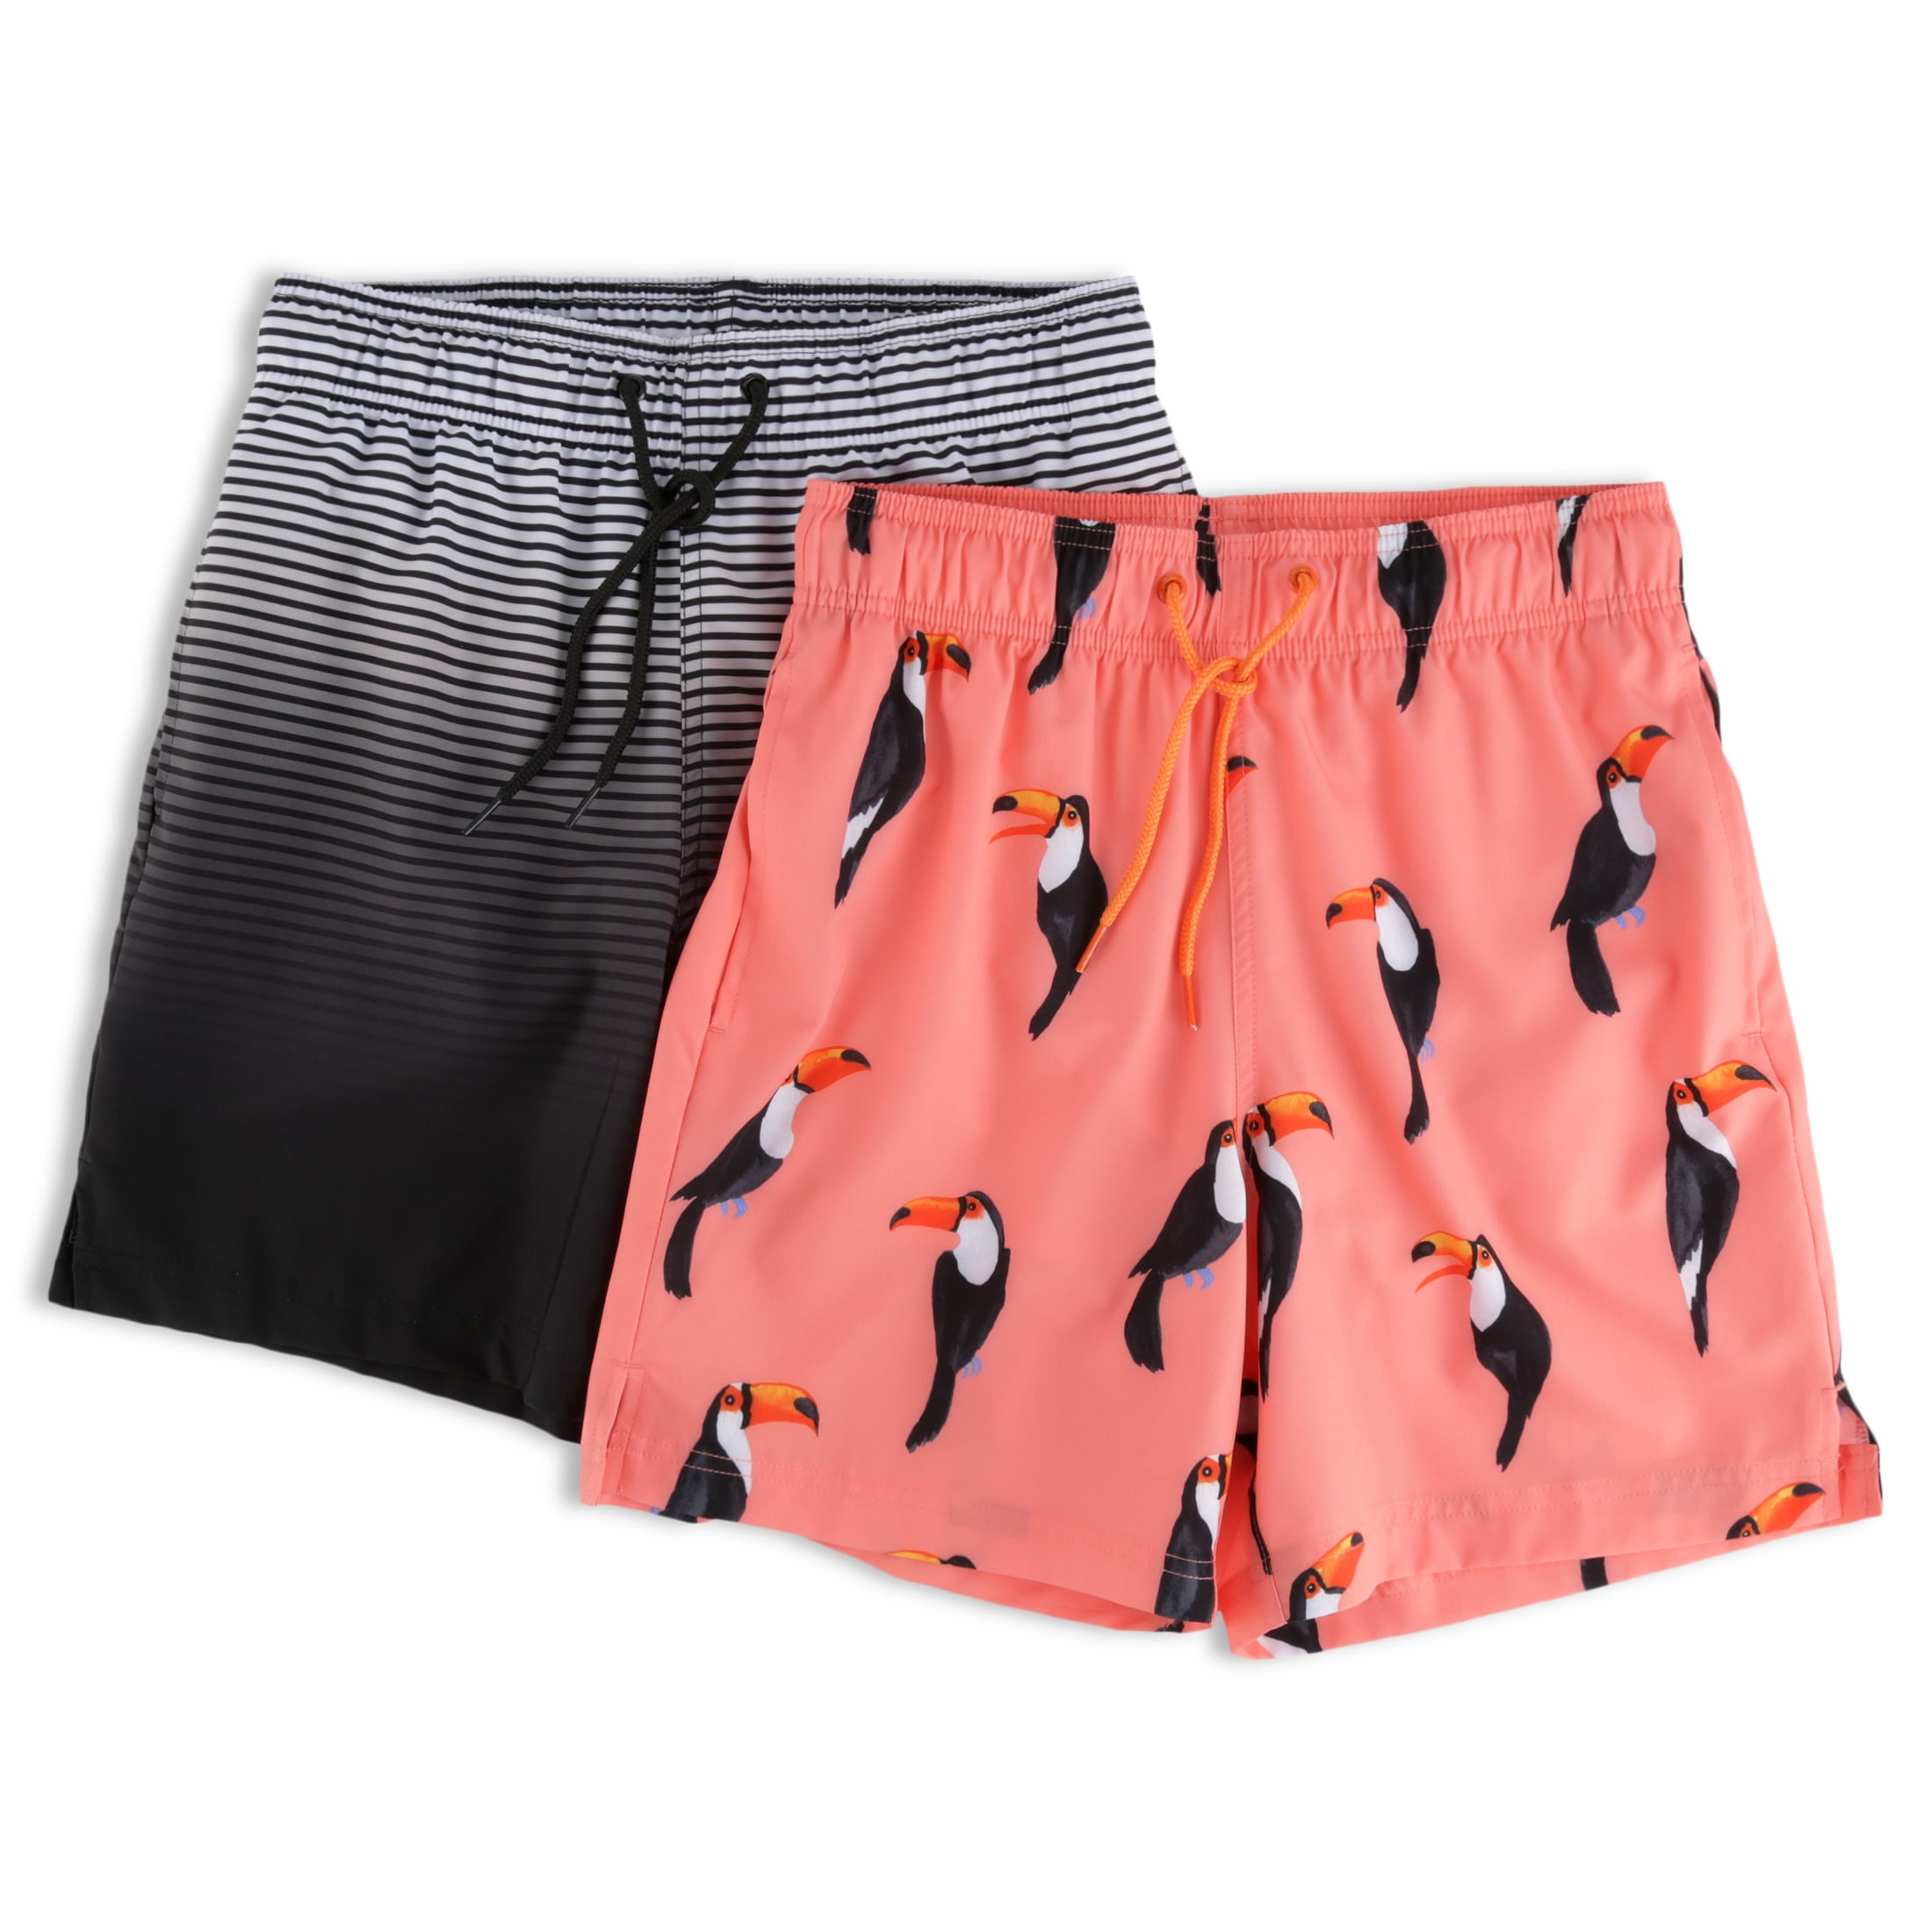 Sage Ambient I eat breakfast George Men's and Big Men's 6" Stripe Black Soot and New Toucan Swim Trunks,  2-Pack, Sizes up to 5XL - Walmart.com